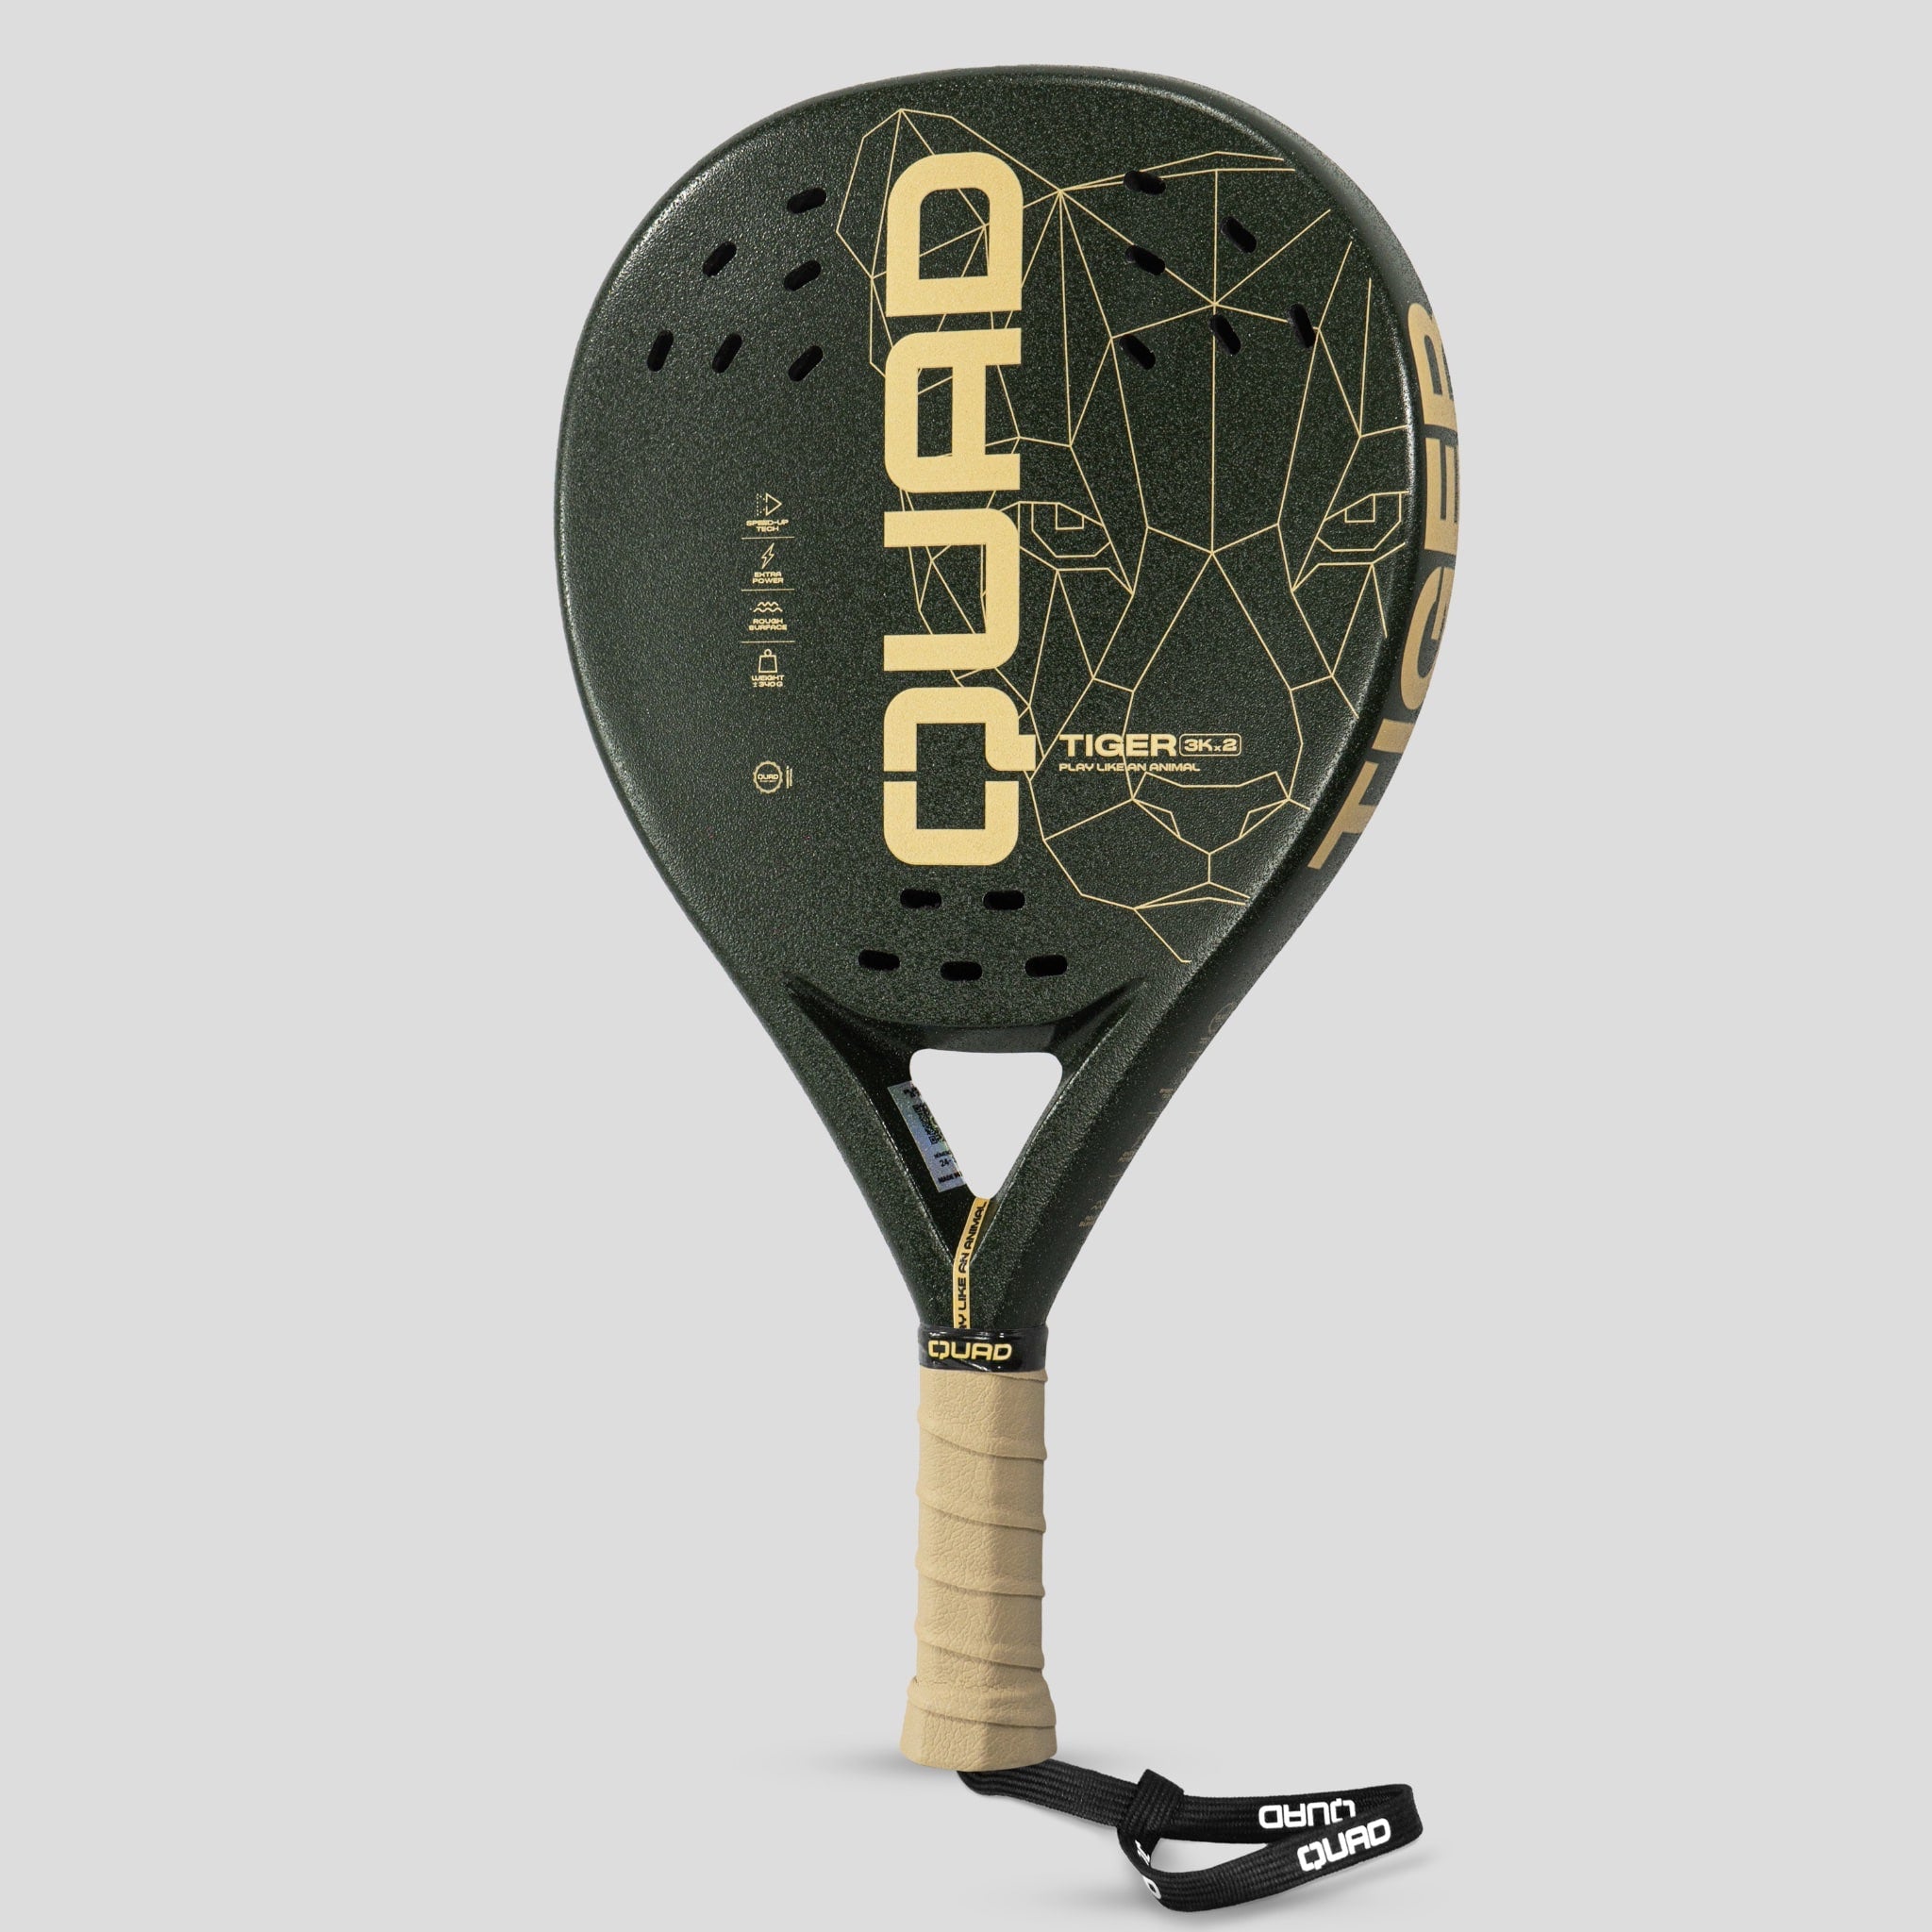 QUAD Tiger Padel Racket right side view